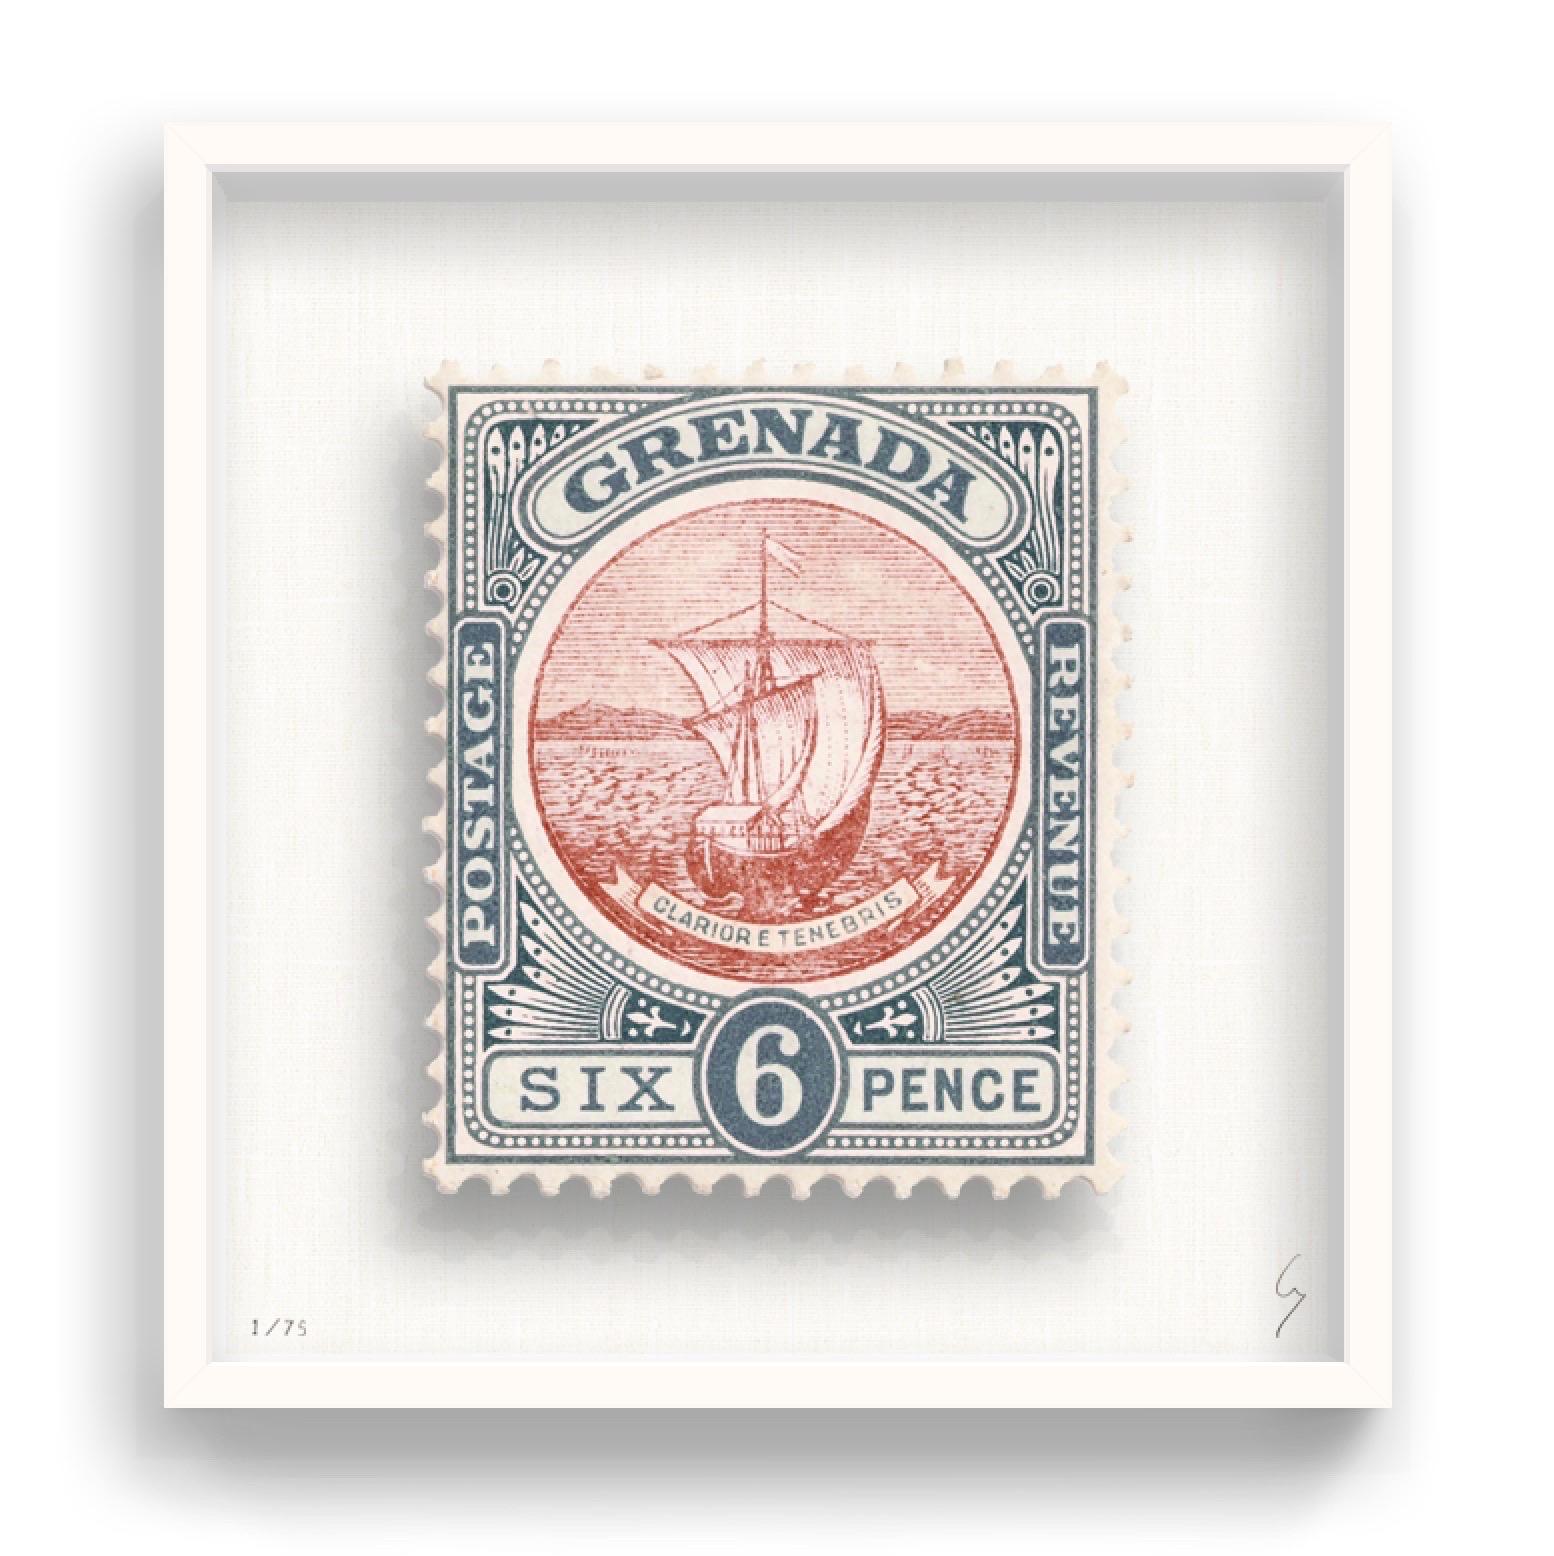 Guy Gee, Grenada (medium)

Hand-engraved print on 350gsm on G.F Smith card
53 x 56cm (20 4/5 x 22 2/5 in)
Frame included 
Edition of 75 

Each artwork by Guy had been digitally reimagined from an original postage stamp. Cut out and finished by hand,